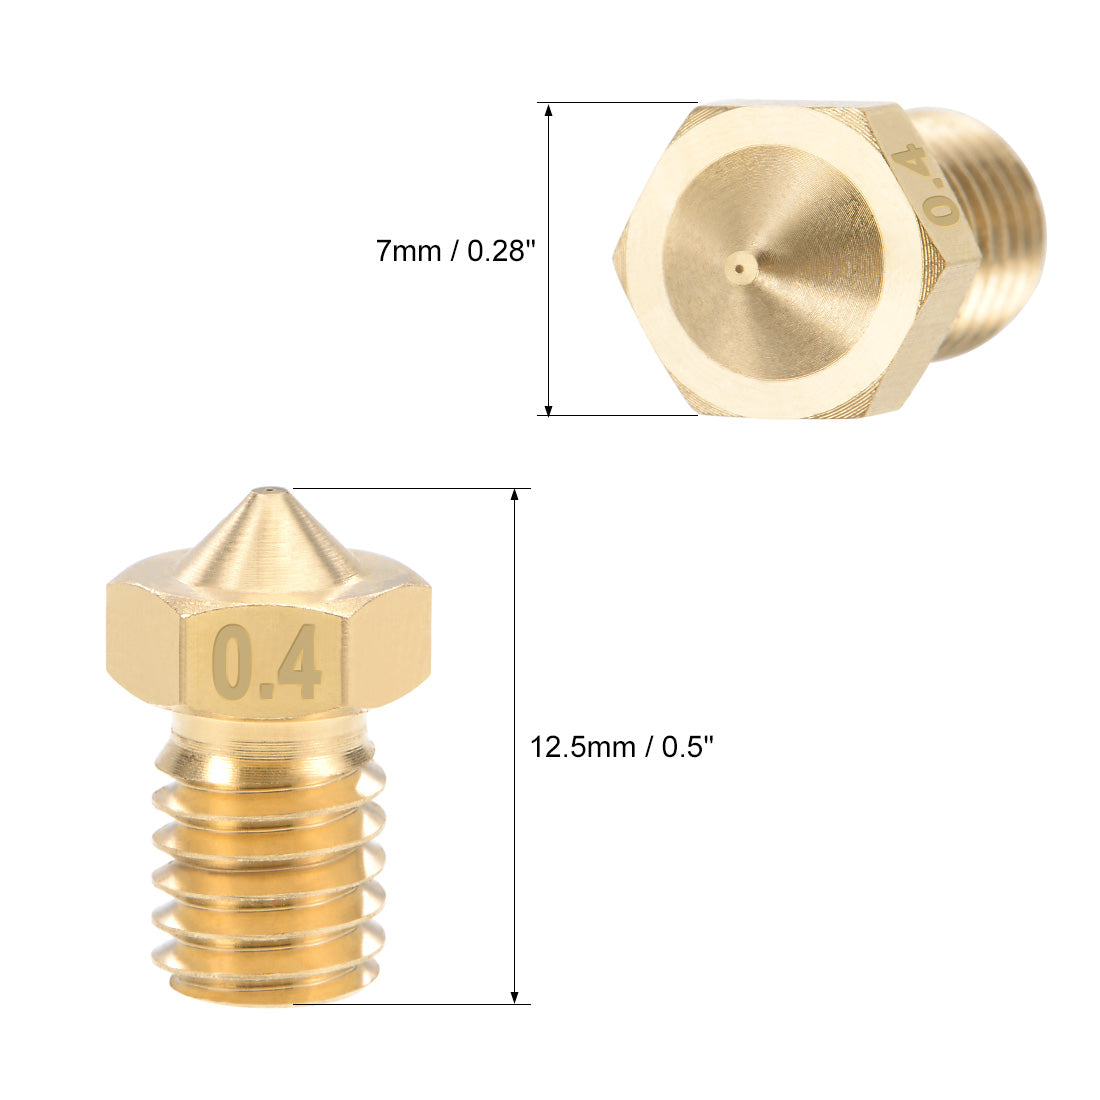 uxcell Uxcell 0.4mm 3D Printer Nozzle Head M6 for V5 V6 3mm Extruder Print, Brass 4pcs